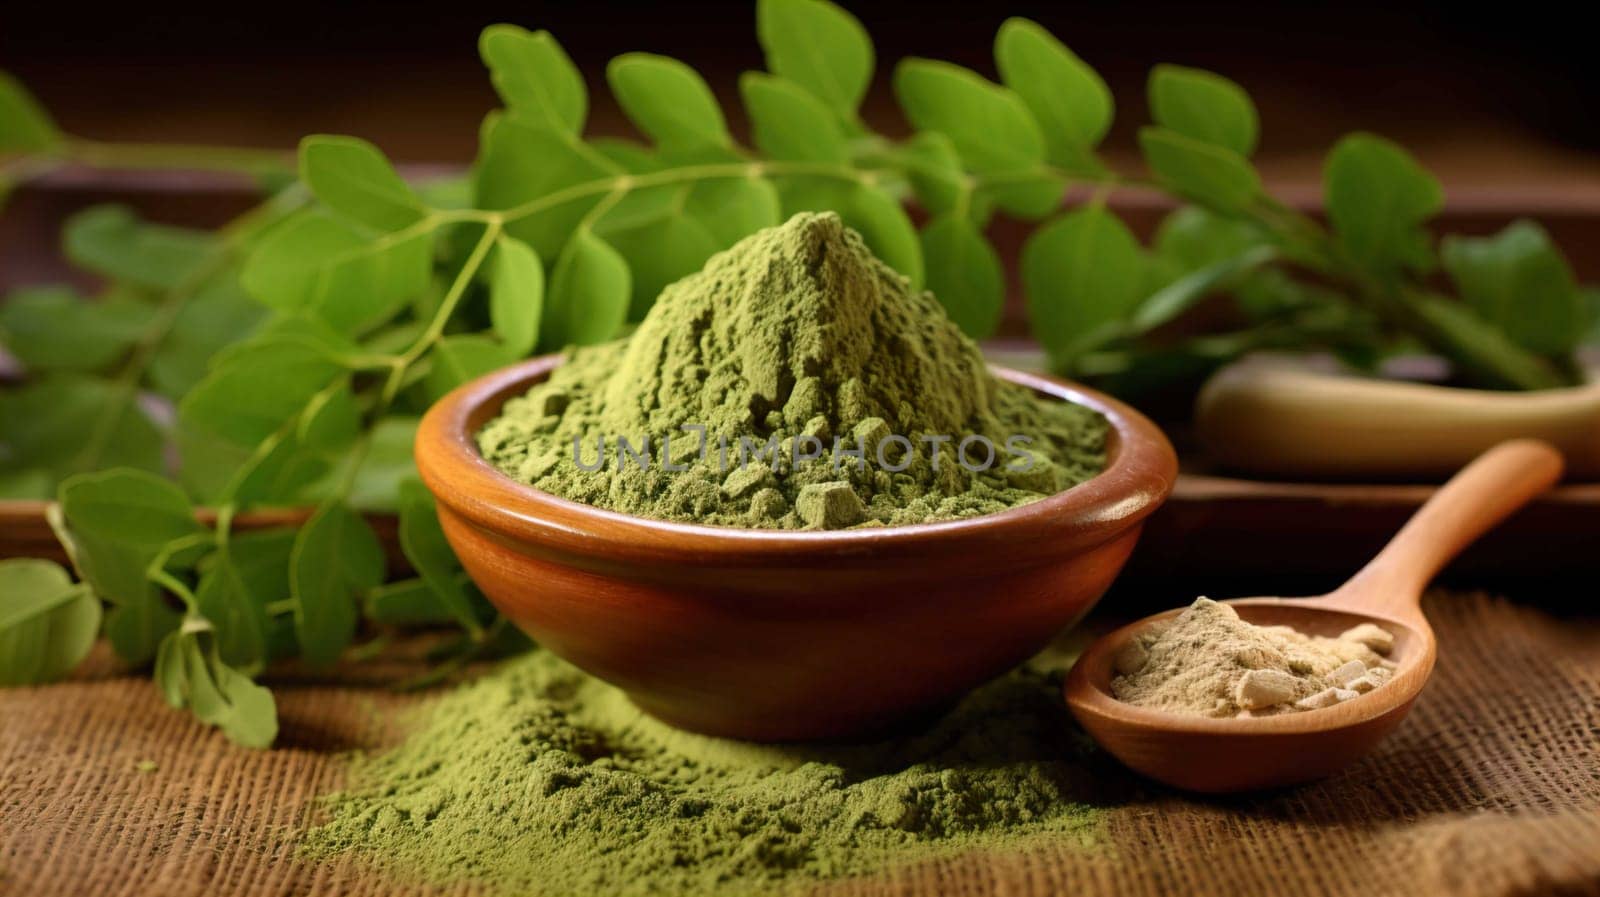  , Moringa oliefera herb leaves, oil and powder Used to treat anemia, rheumatism, cancer, diarrhea, diabetes , Generate AI by Mrsongrphc